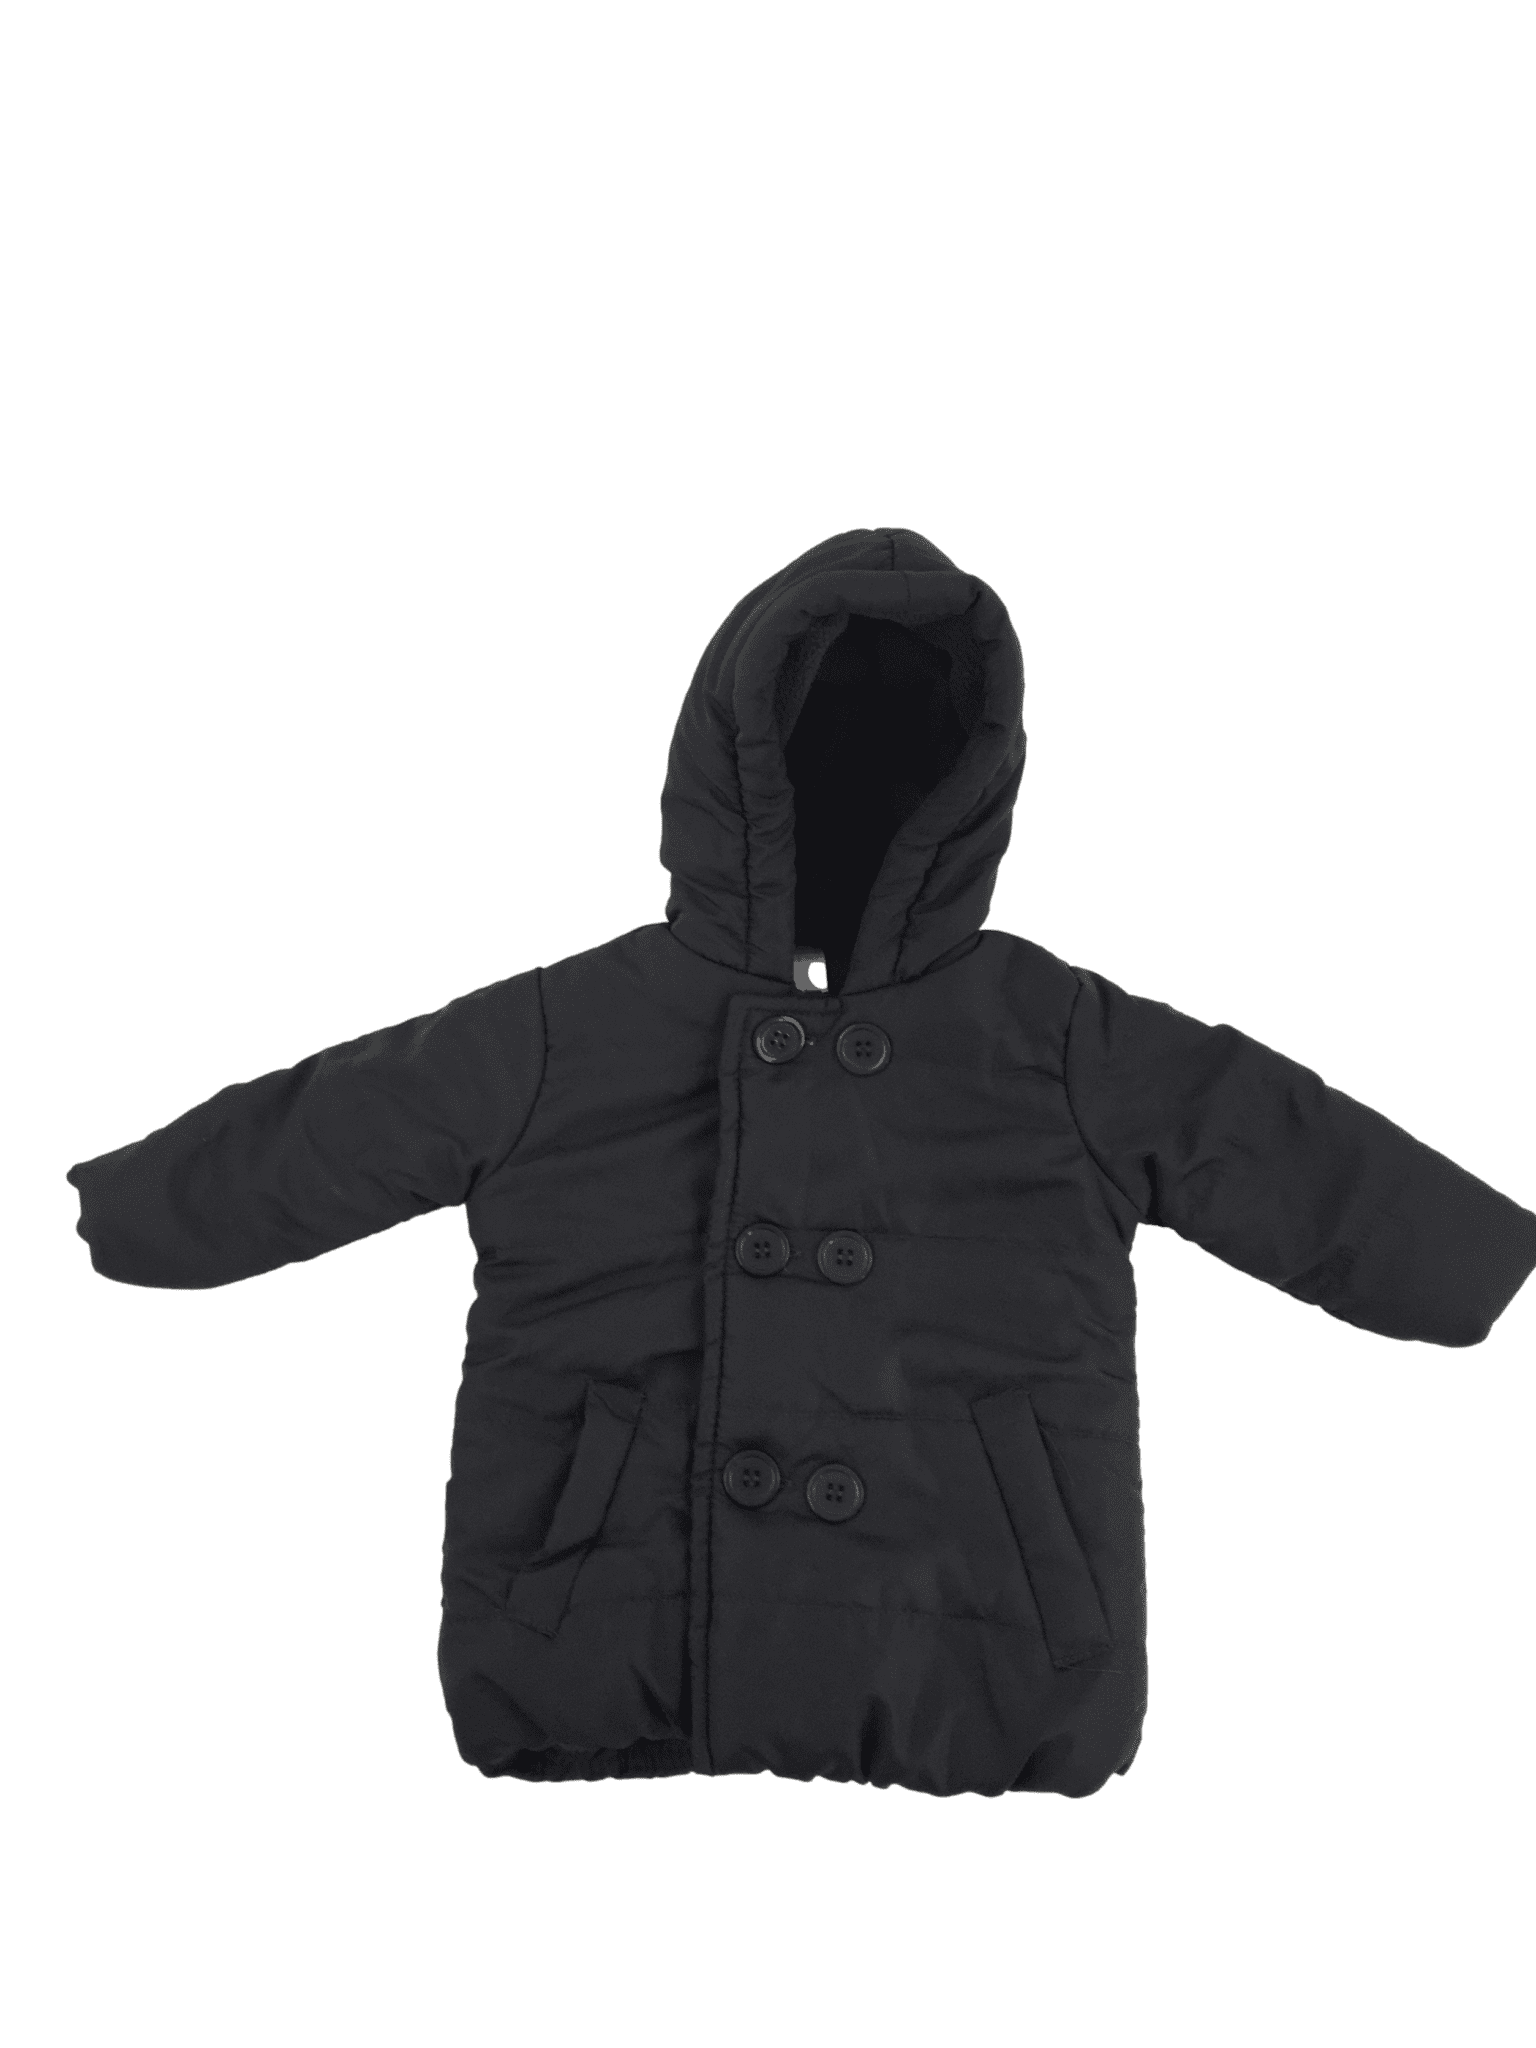 3-6M Black Puffer Fleece Lined Double Breasted Hooded Jacket ...